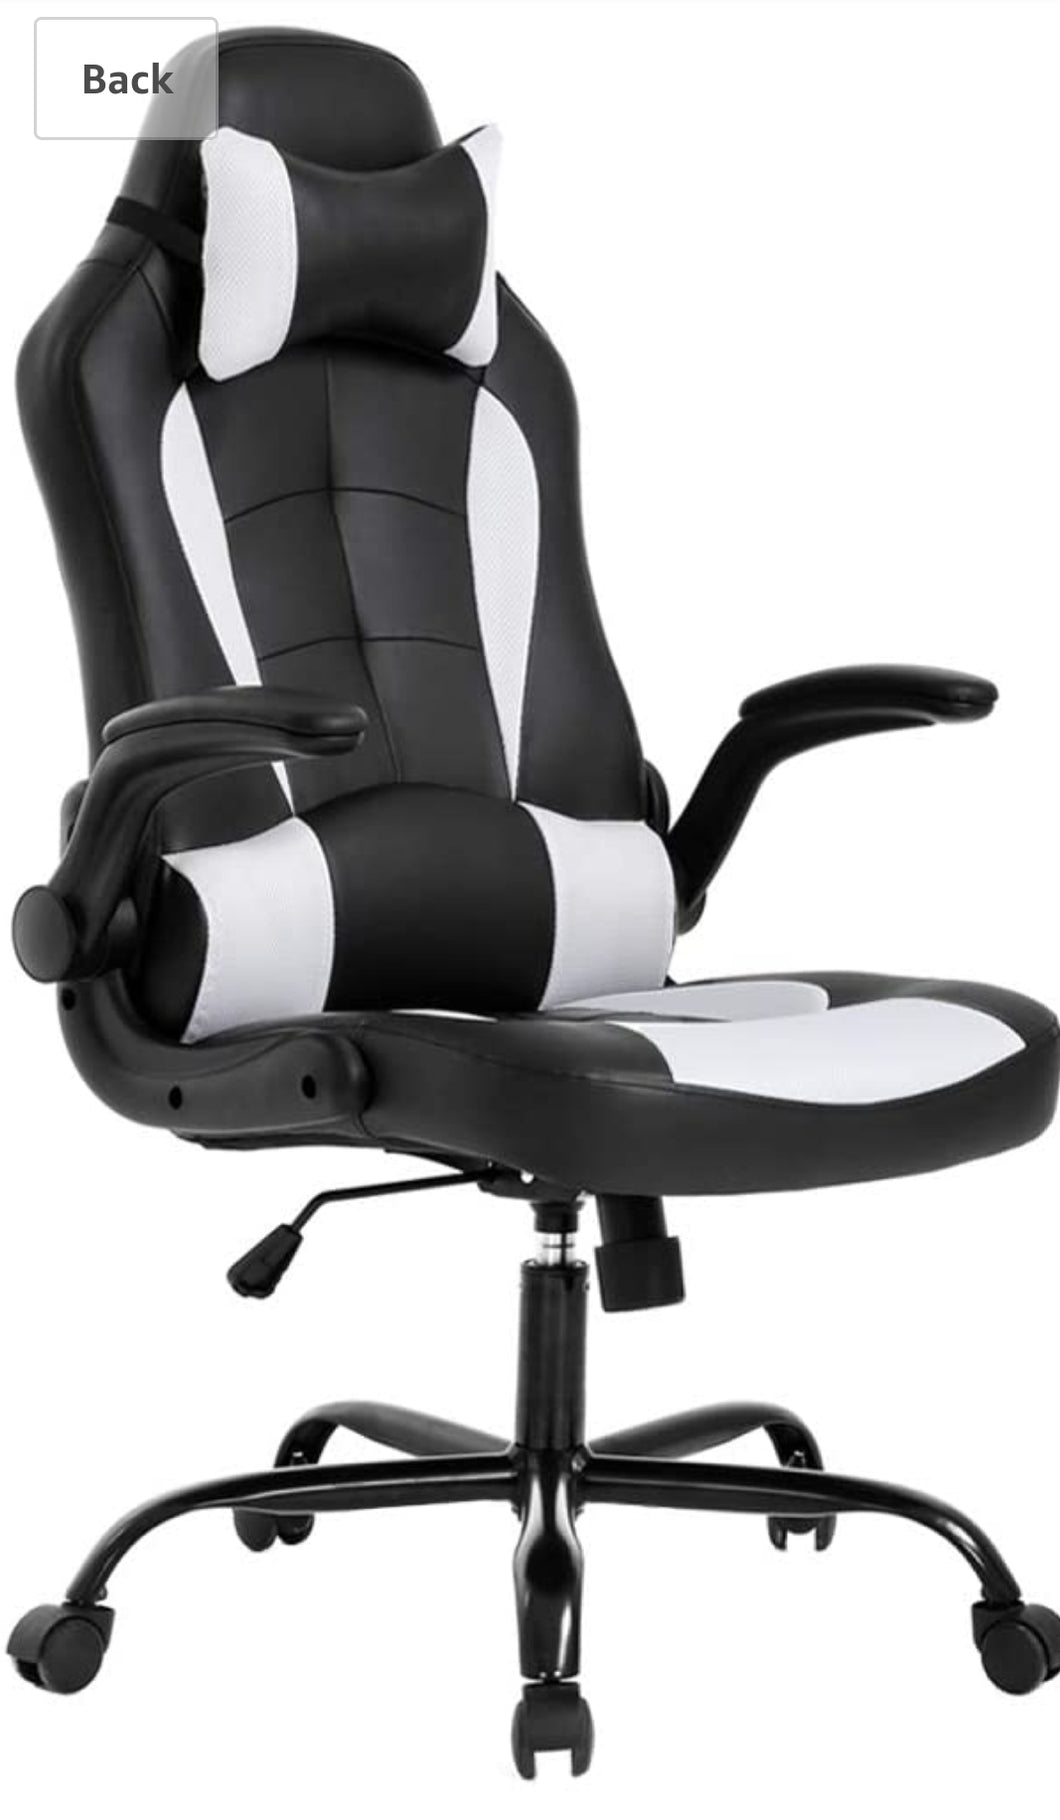 PU Leather Executive High Back Computer Chair for Adults Women Men, Black and White